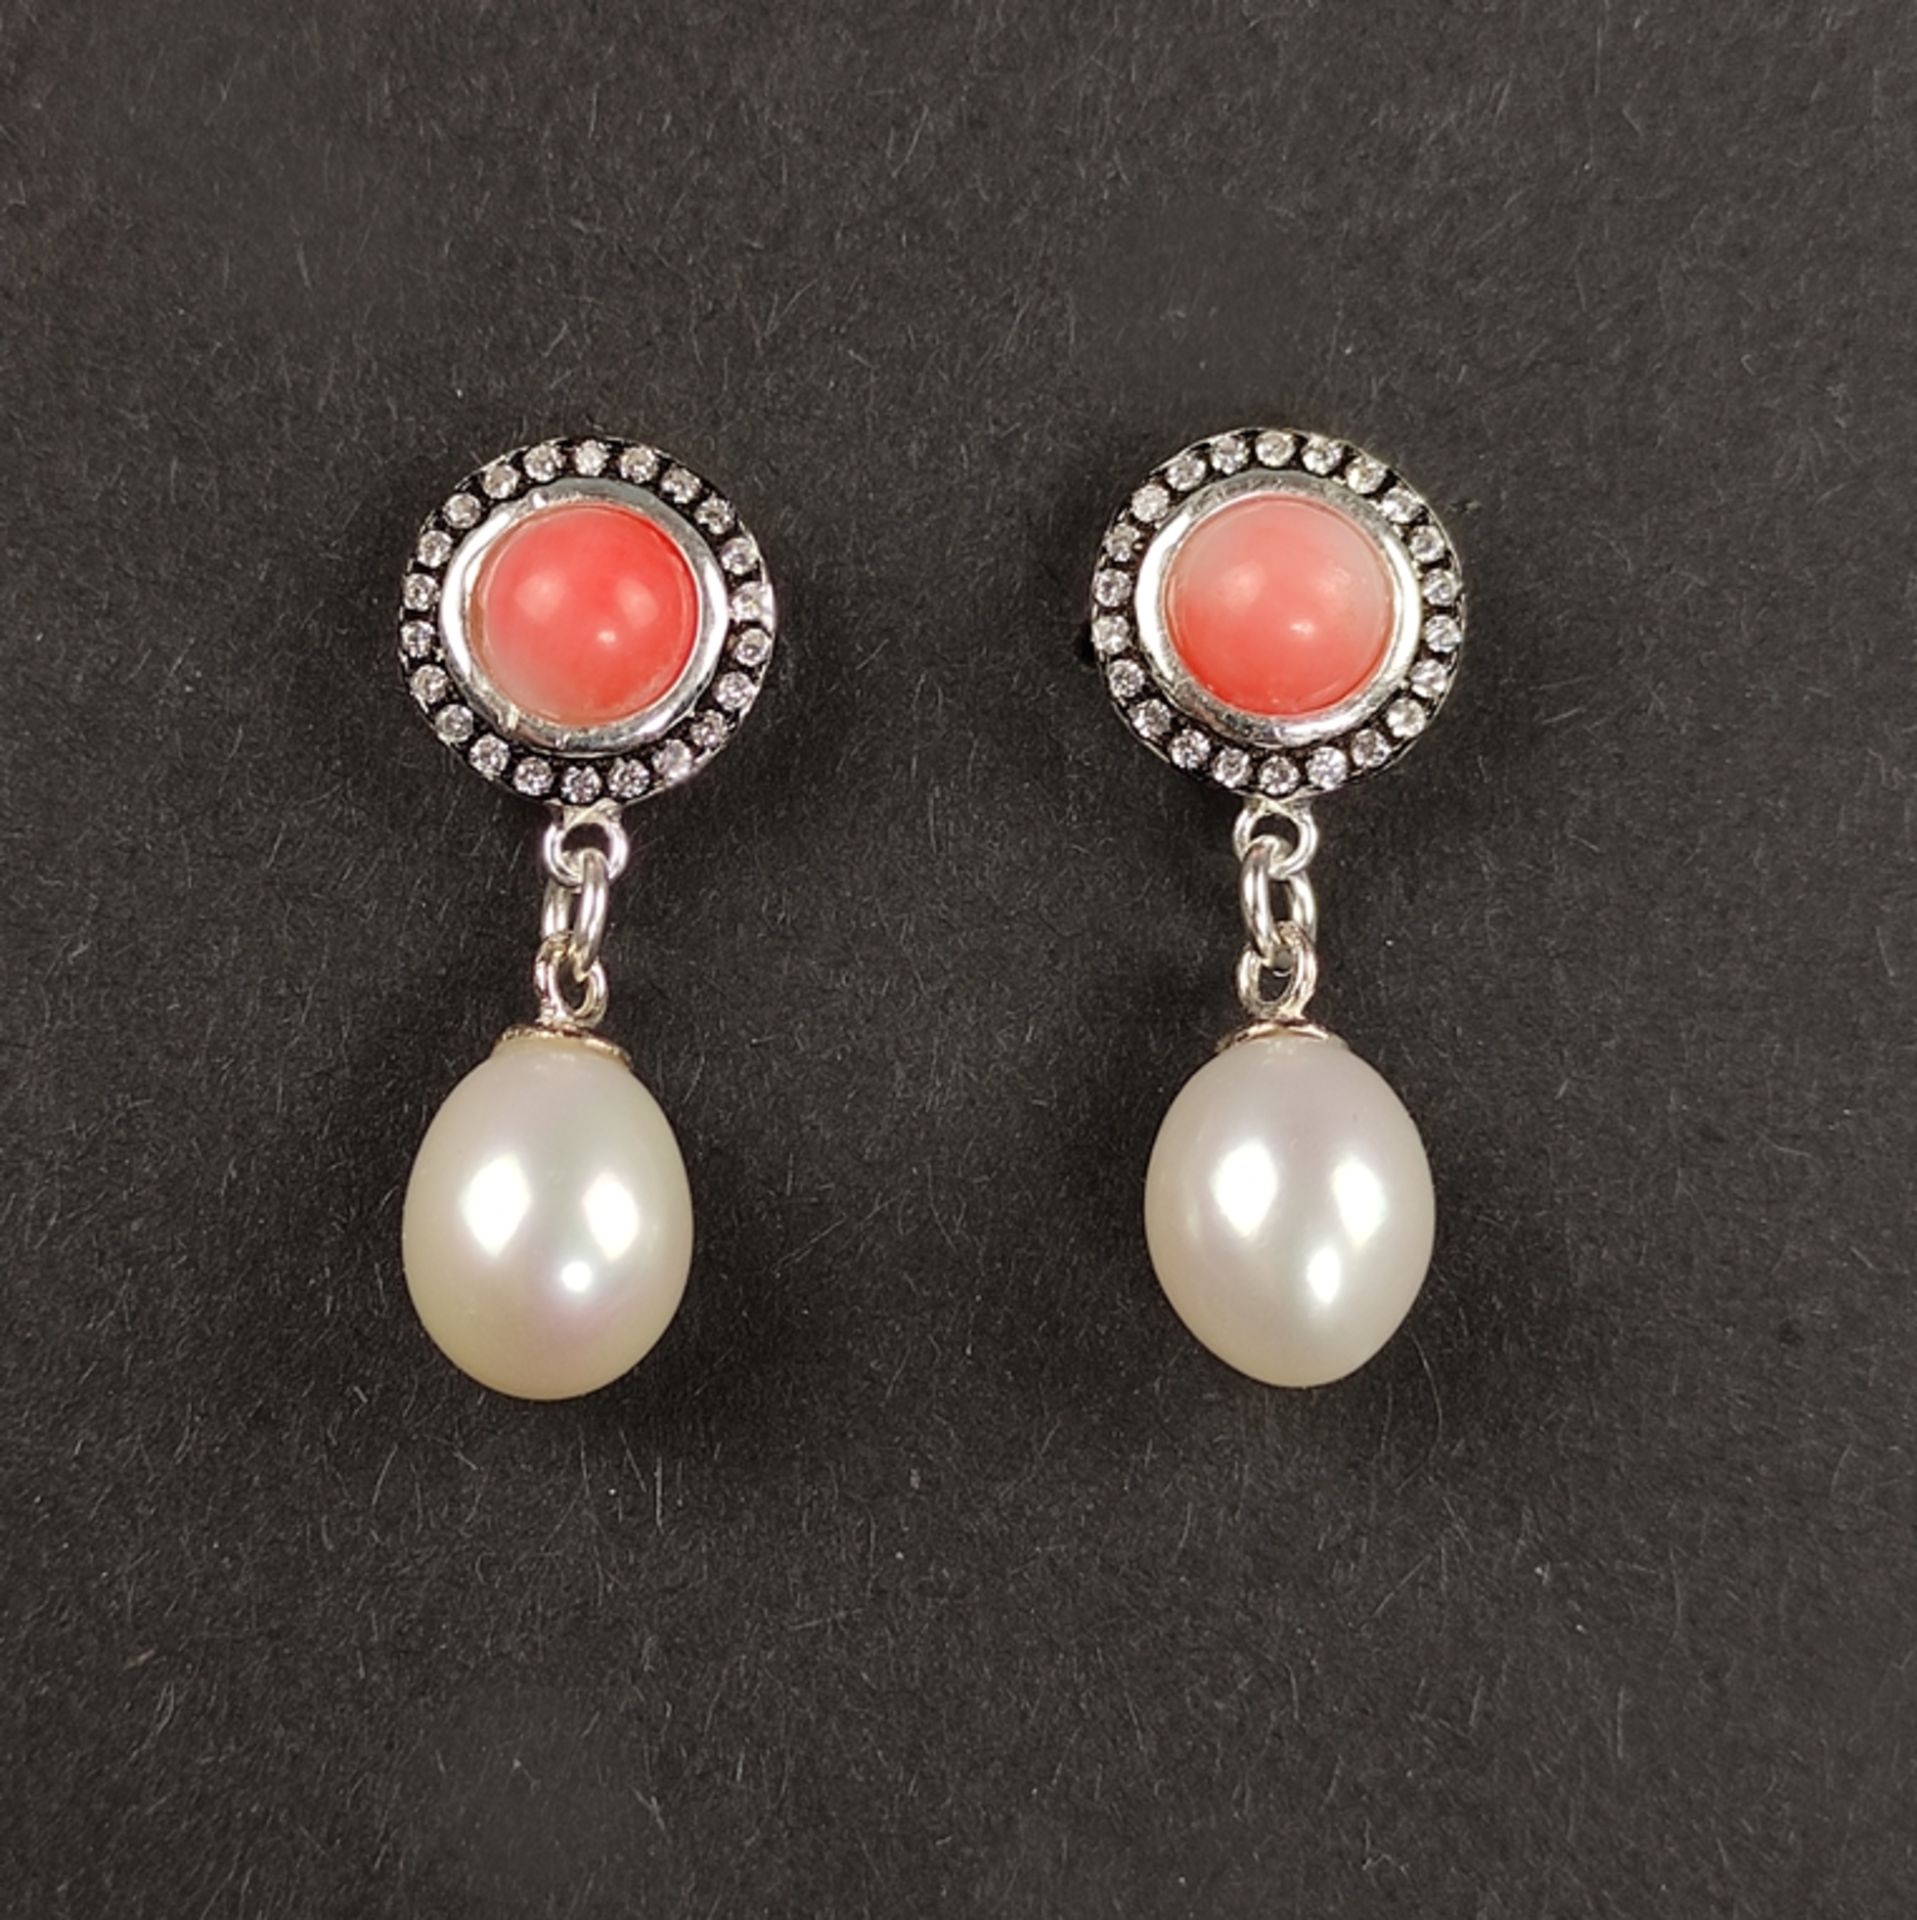 Coral pearl earrings, silver 925, 5g, stud earrings set with delicate salmon red coral cabochons, e